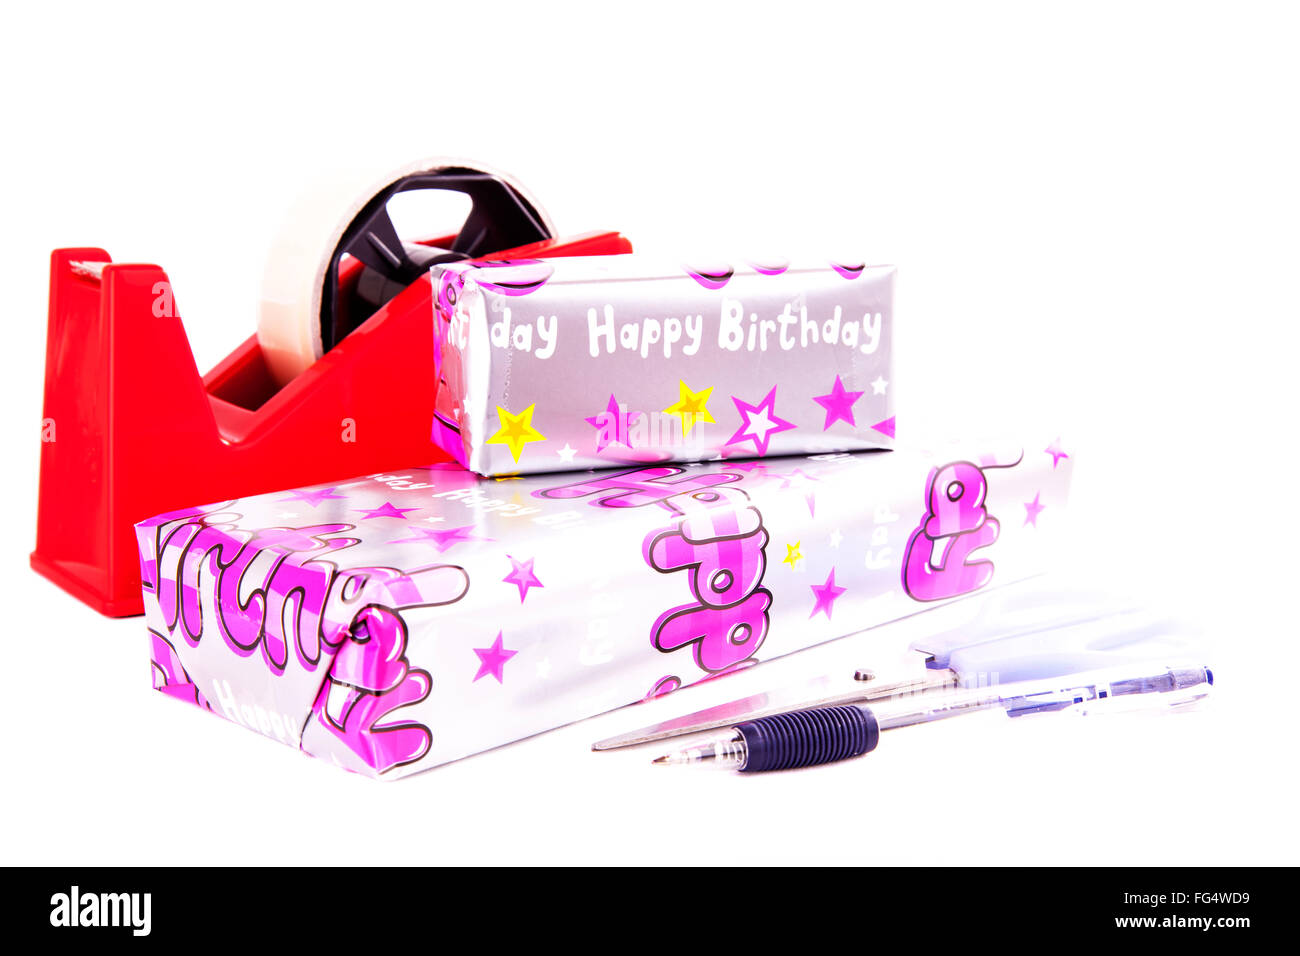 Wrapping birthday presents present gift gifts paper wrapped pen scissors sellotape Cut out cutout isolated white background Stock Photo